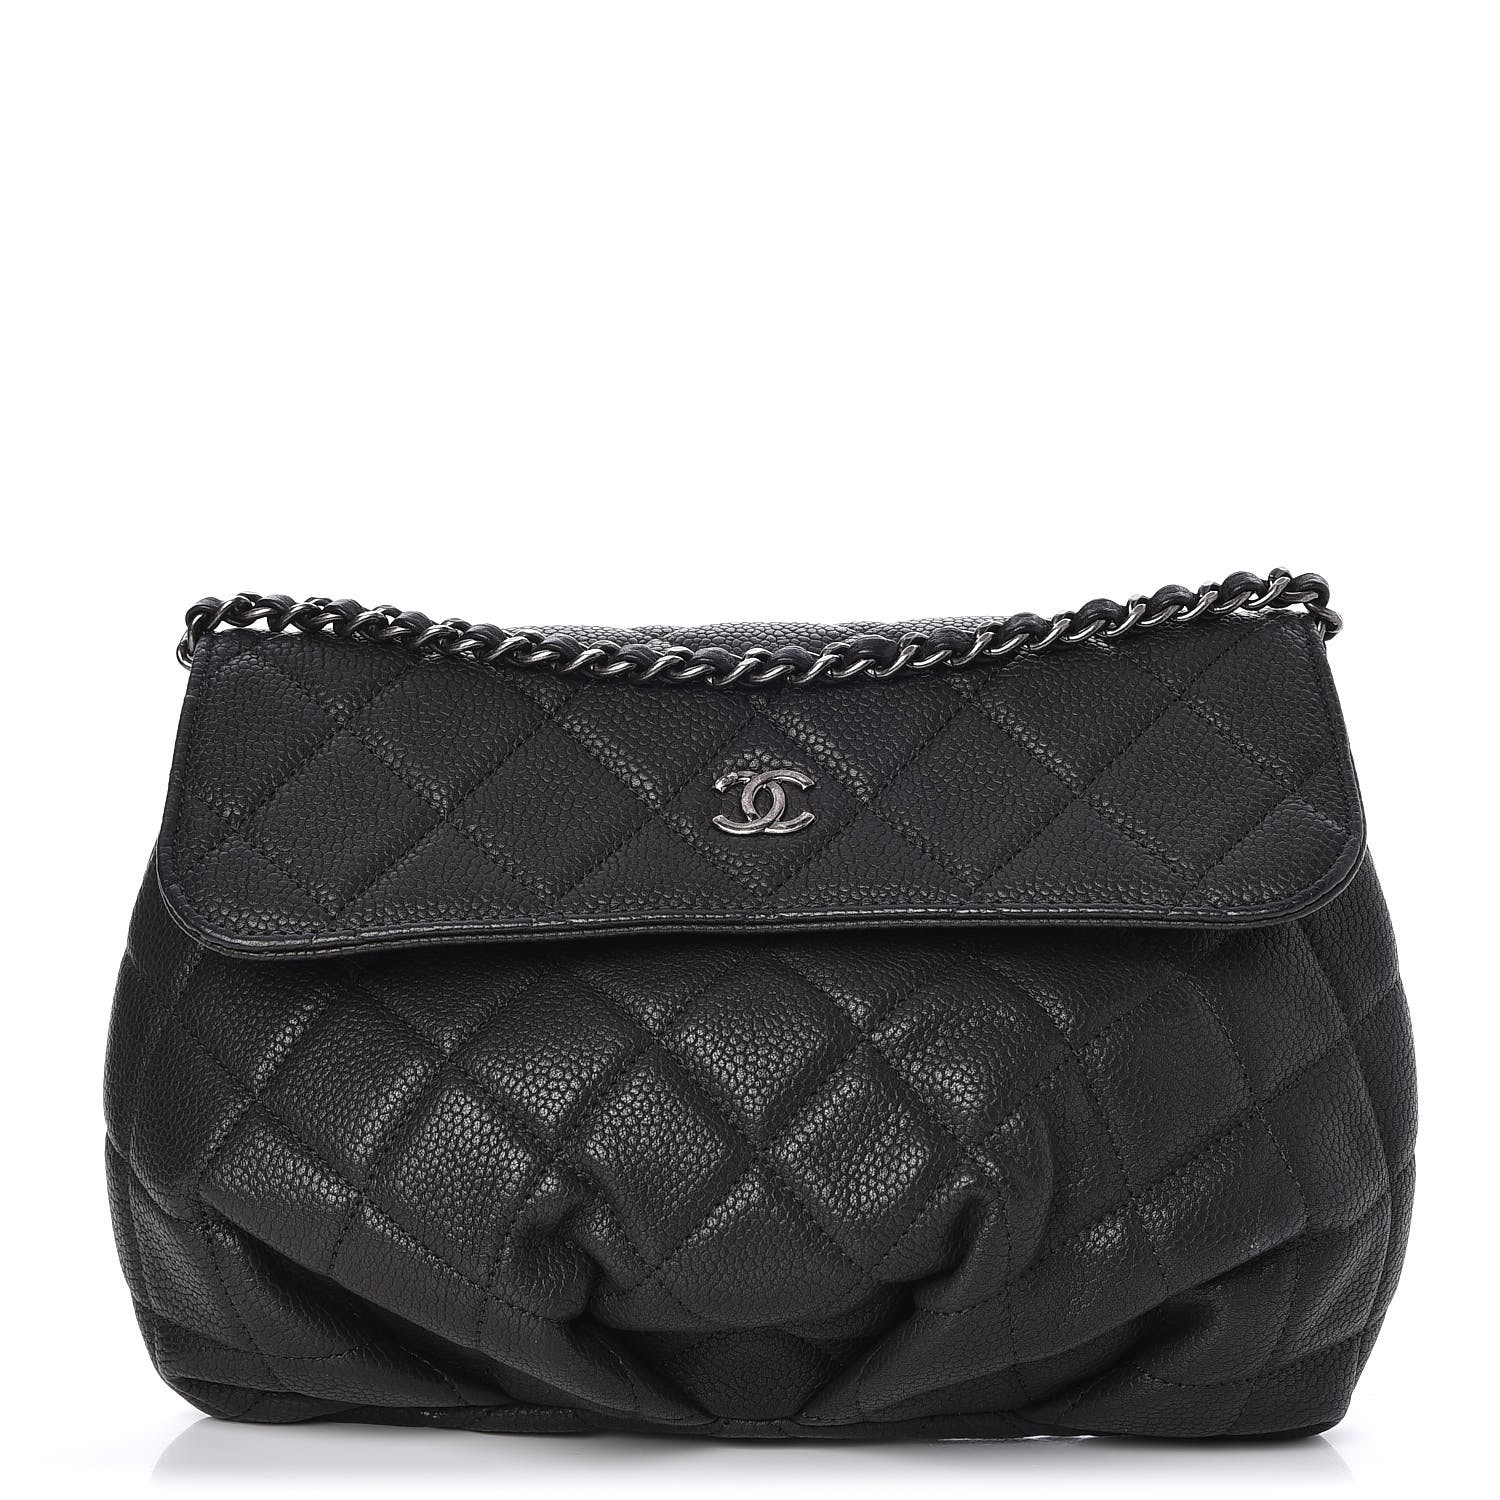 CHANEL Caviar Quilted Crossbody Bag Black 254209